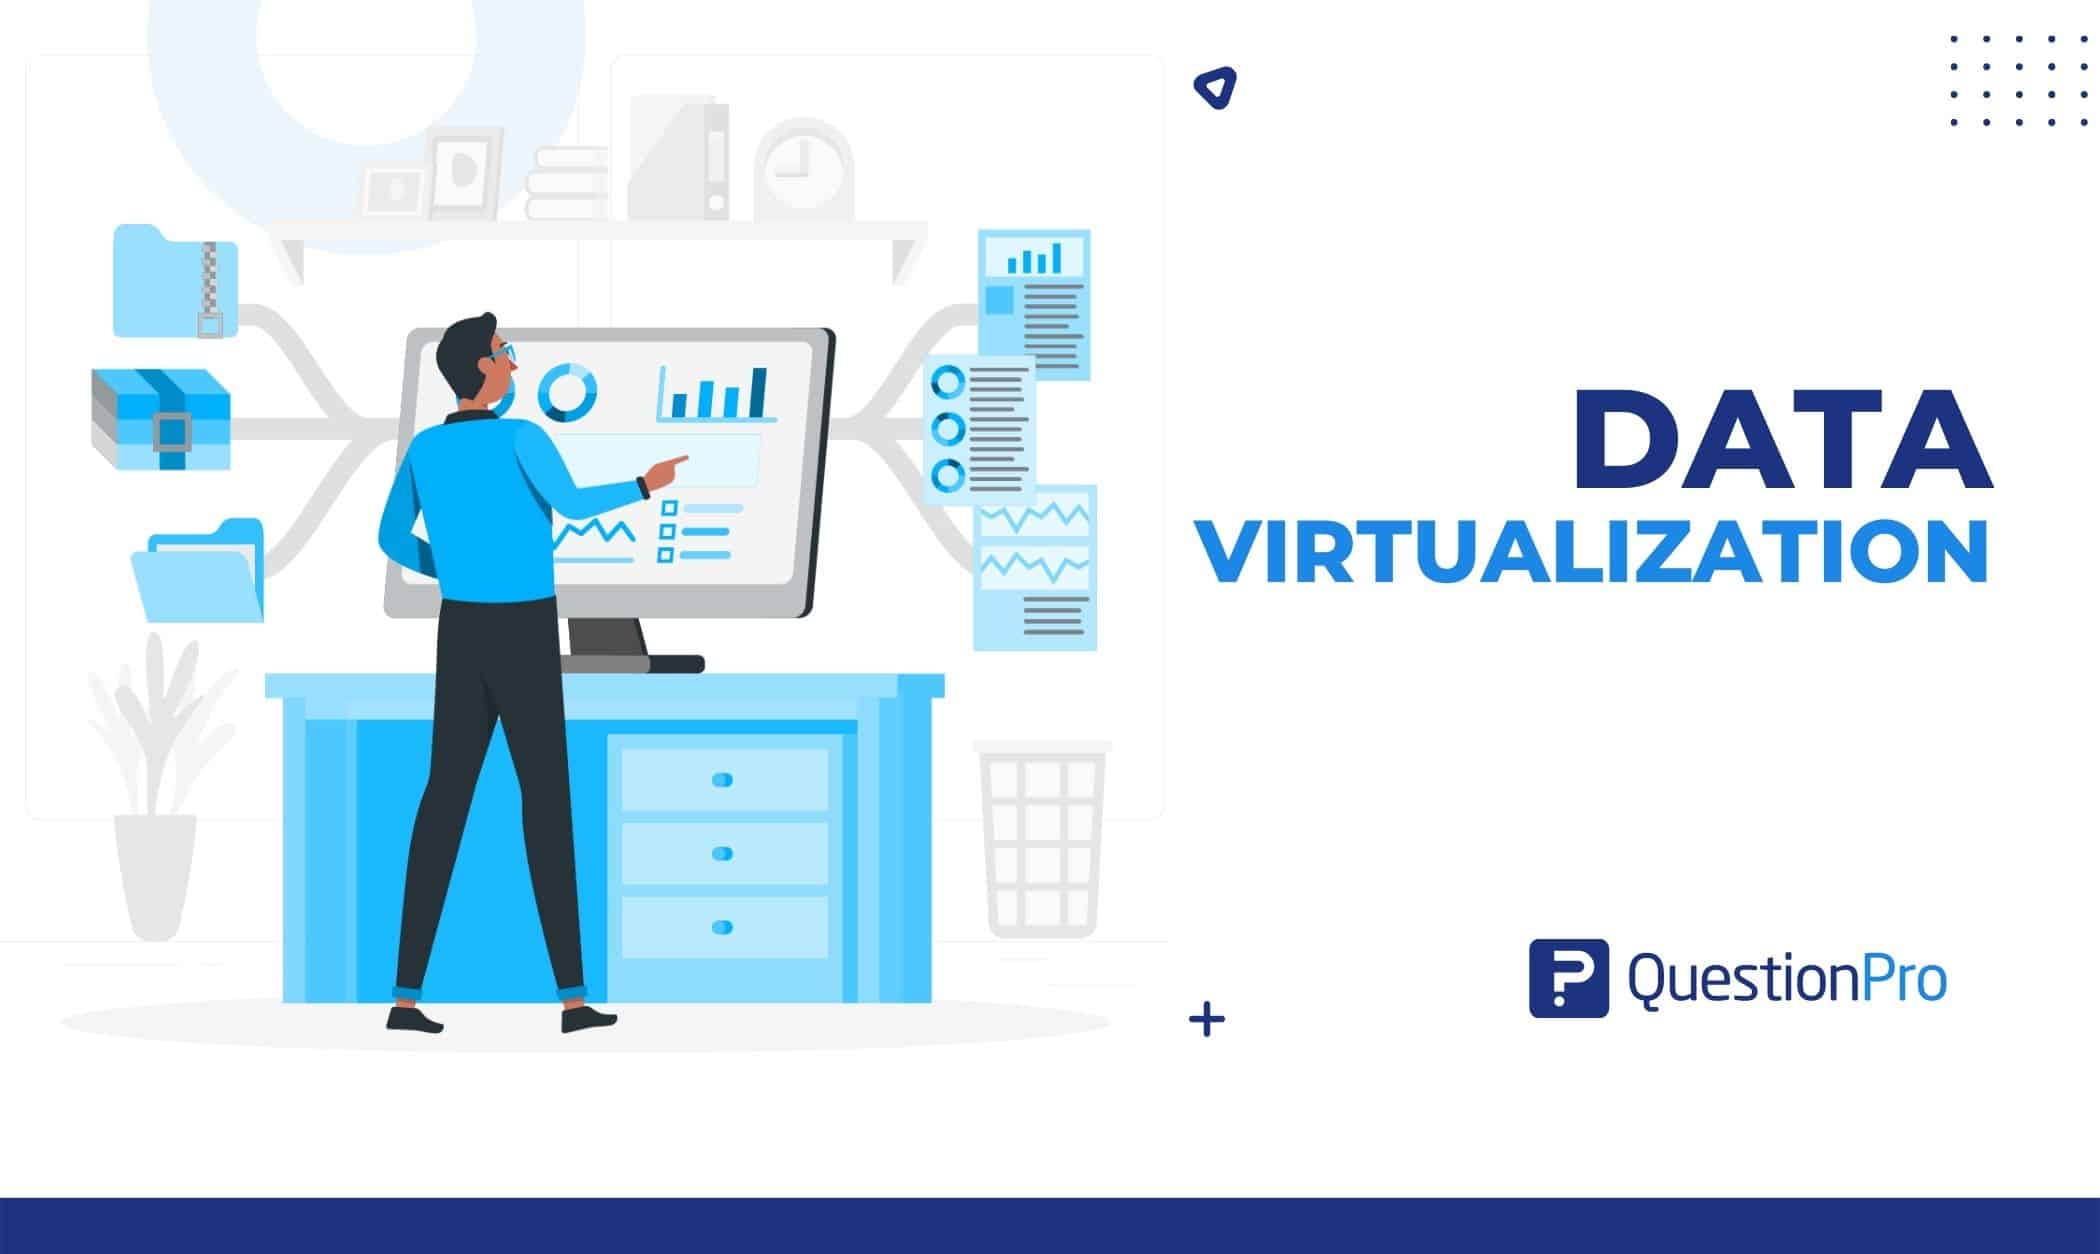 Data virtualization integrates data from many sources without moving it. It can benefit a business. Learn how to do it properly in this blog.